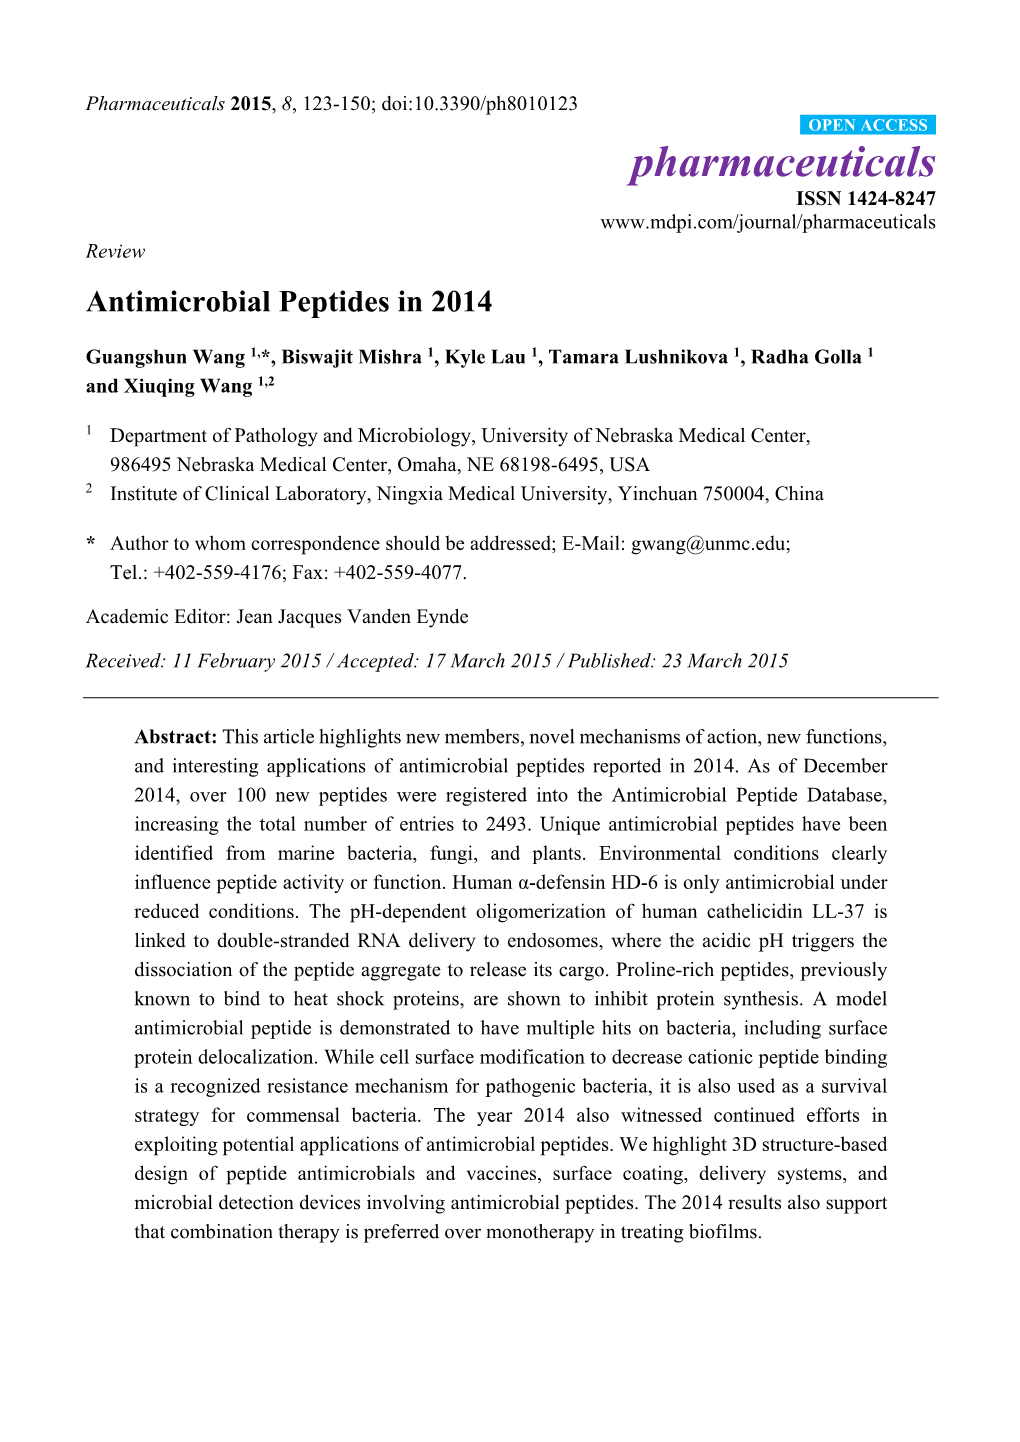 Antimicrobial Peptides in 2014